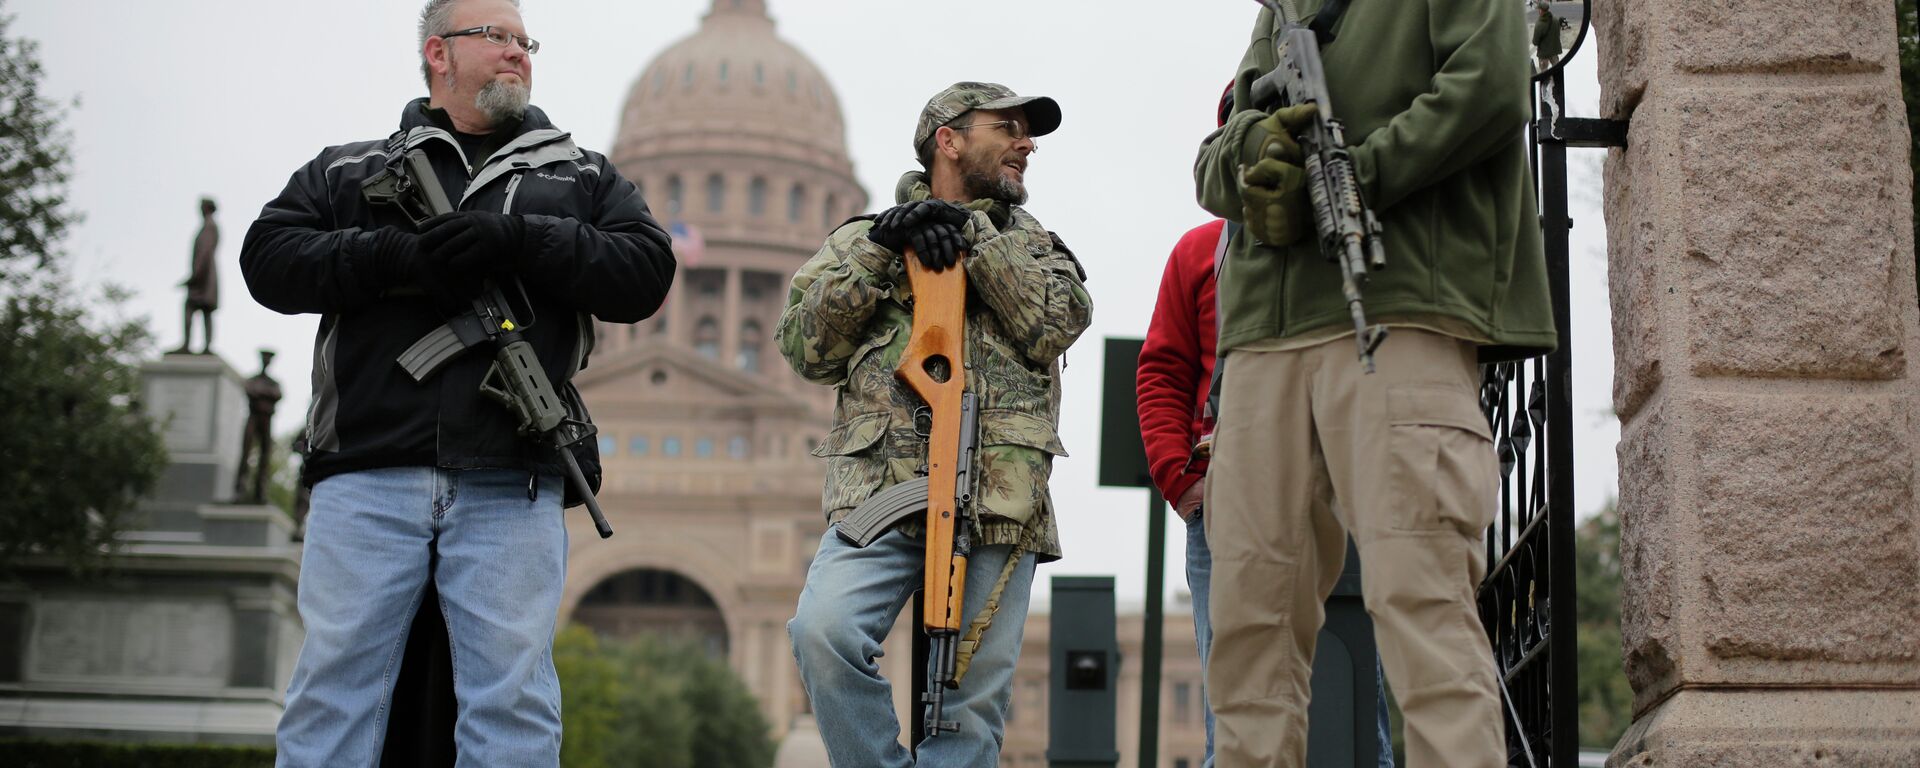 In this Jan. 13, 2015 file photo, gun rights advocates carry rifles while protesting outside the Texas Capitol in Austin, Texas - Sputnik International, 1920, 02.06.2022